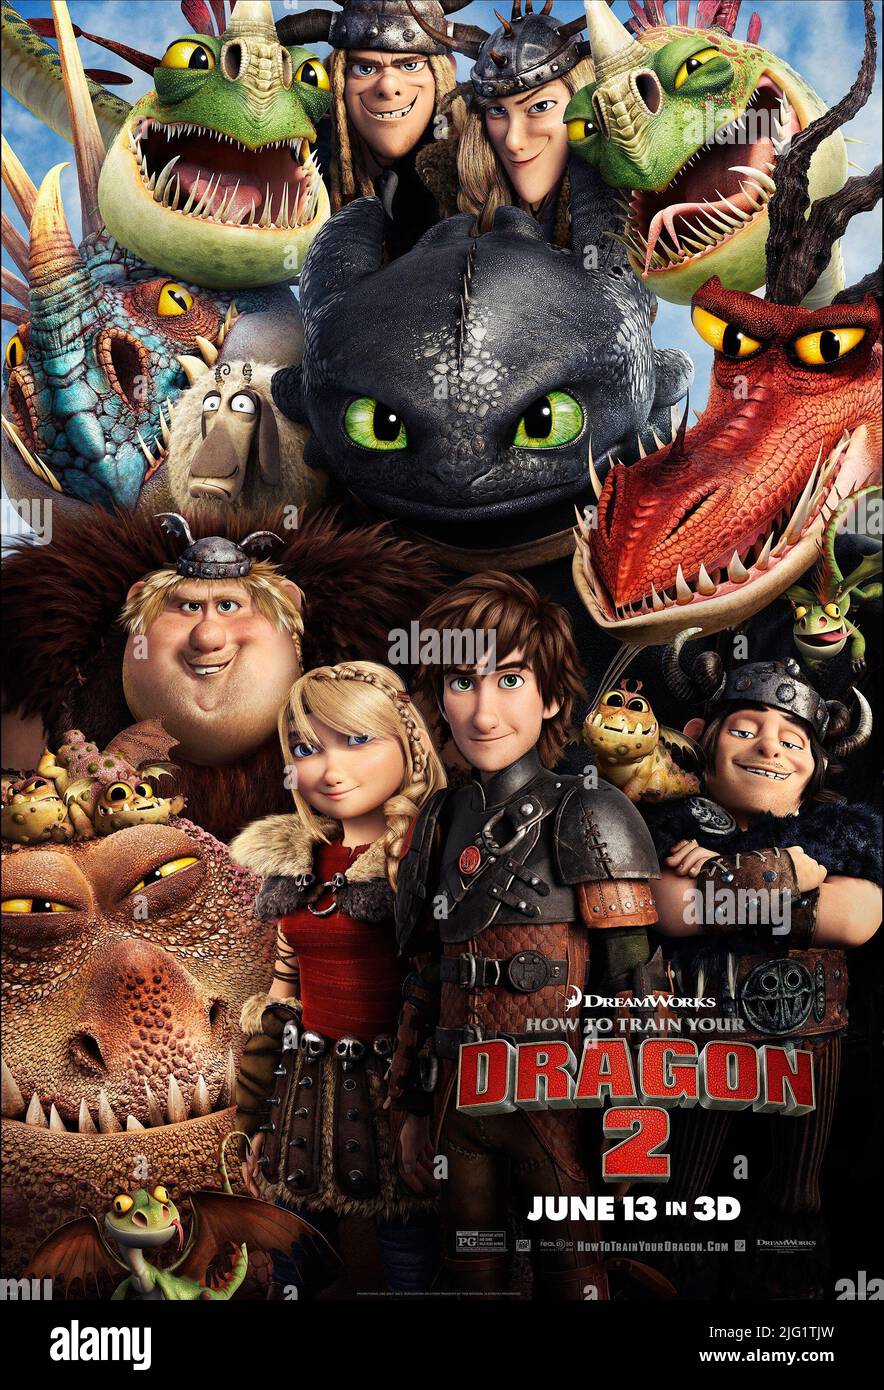 TOOTHLESS, ASTRID, HICCUP POSTER, HOW TO TRAIN YOUR DRAGON 2, 2014 Stock Photo